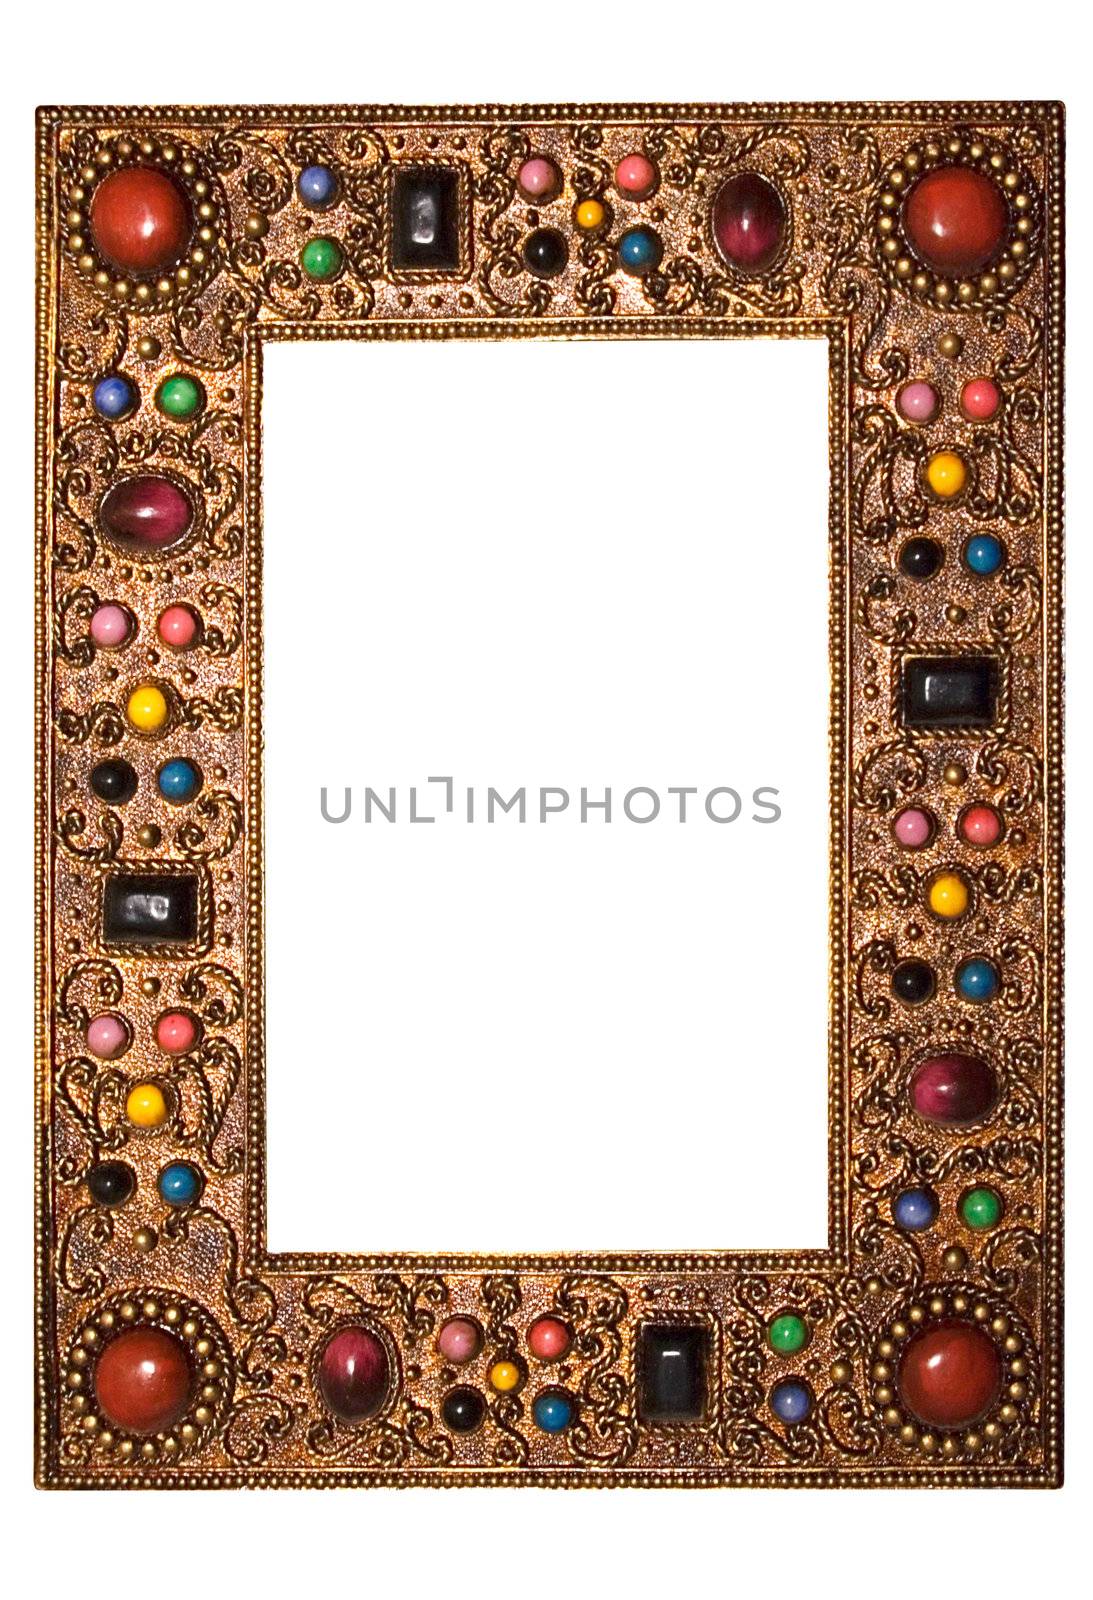 Metal picture frame isolated on a white background. File contains clipping path.